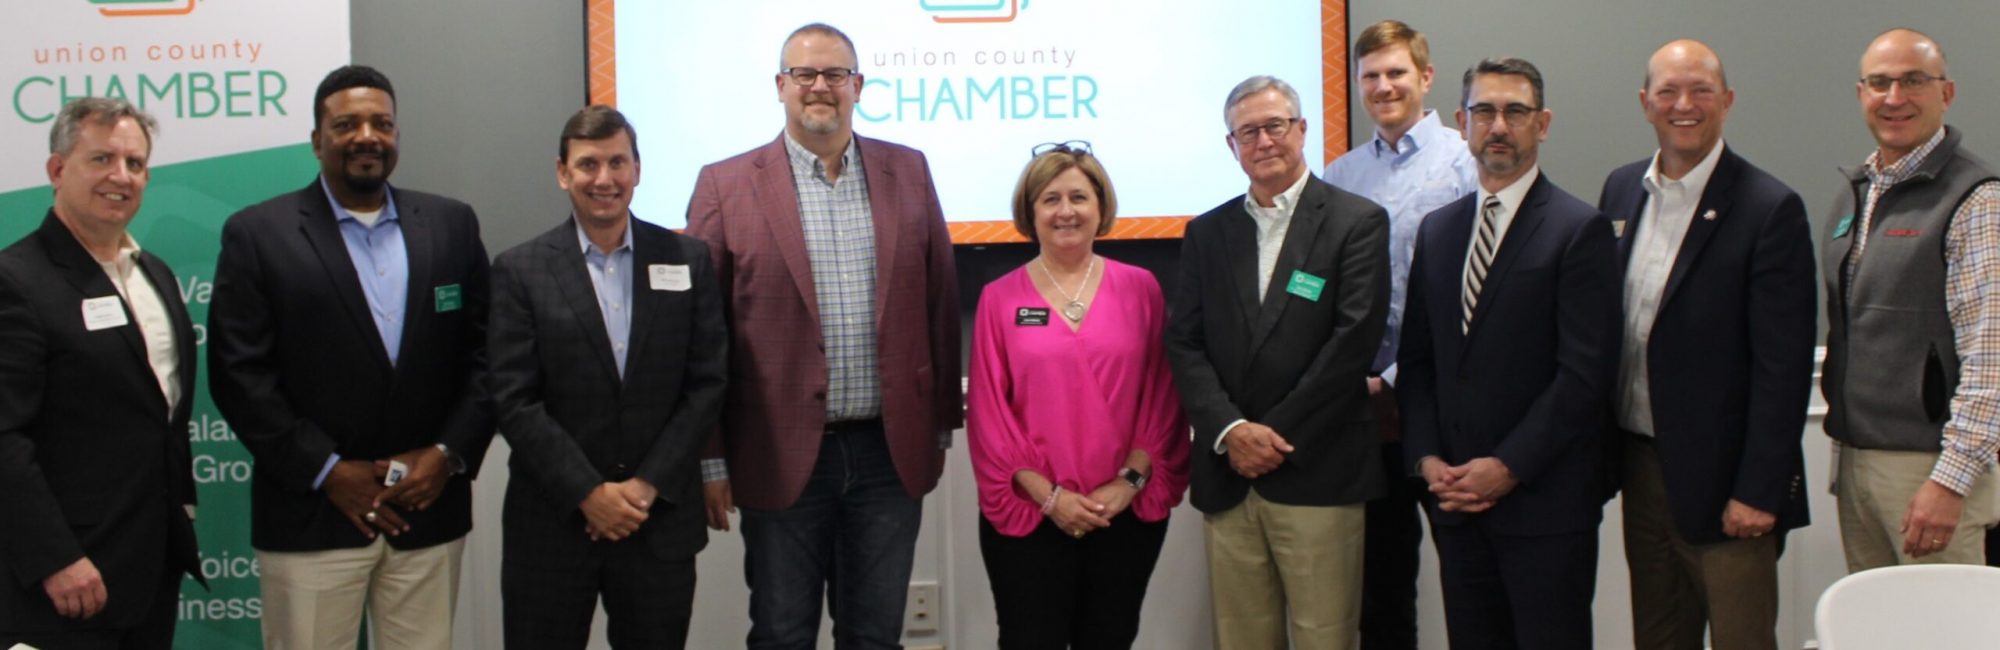 Members of the Union County Chamber Public Policy Committee